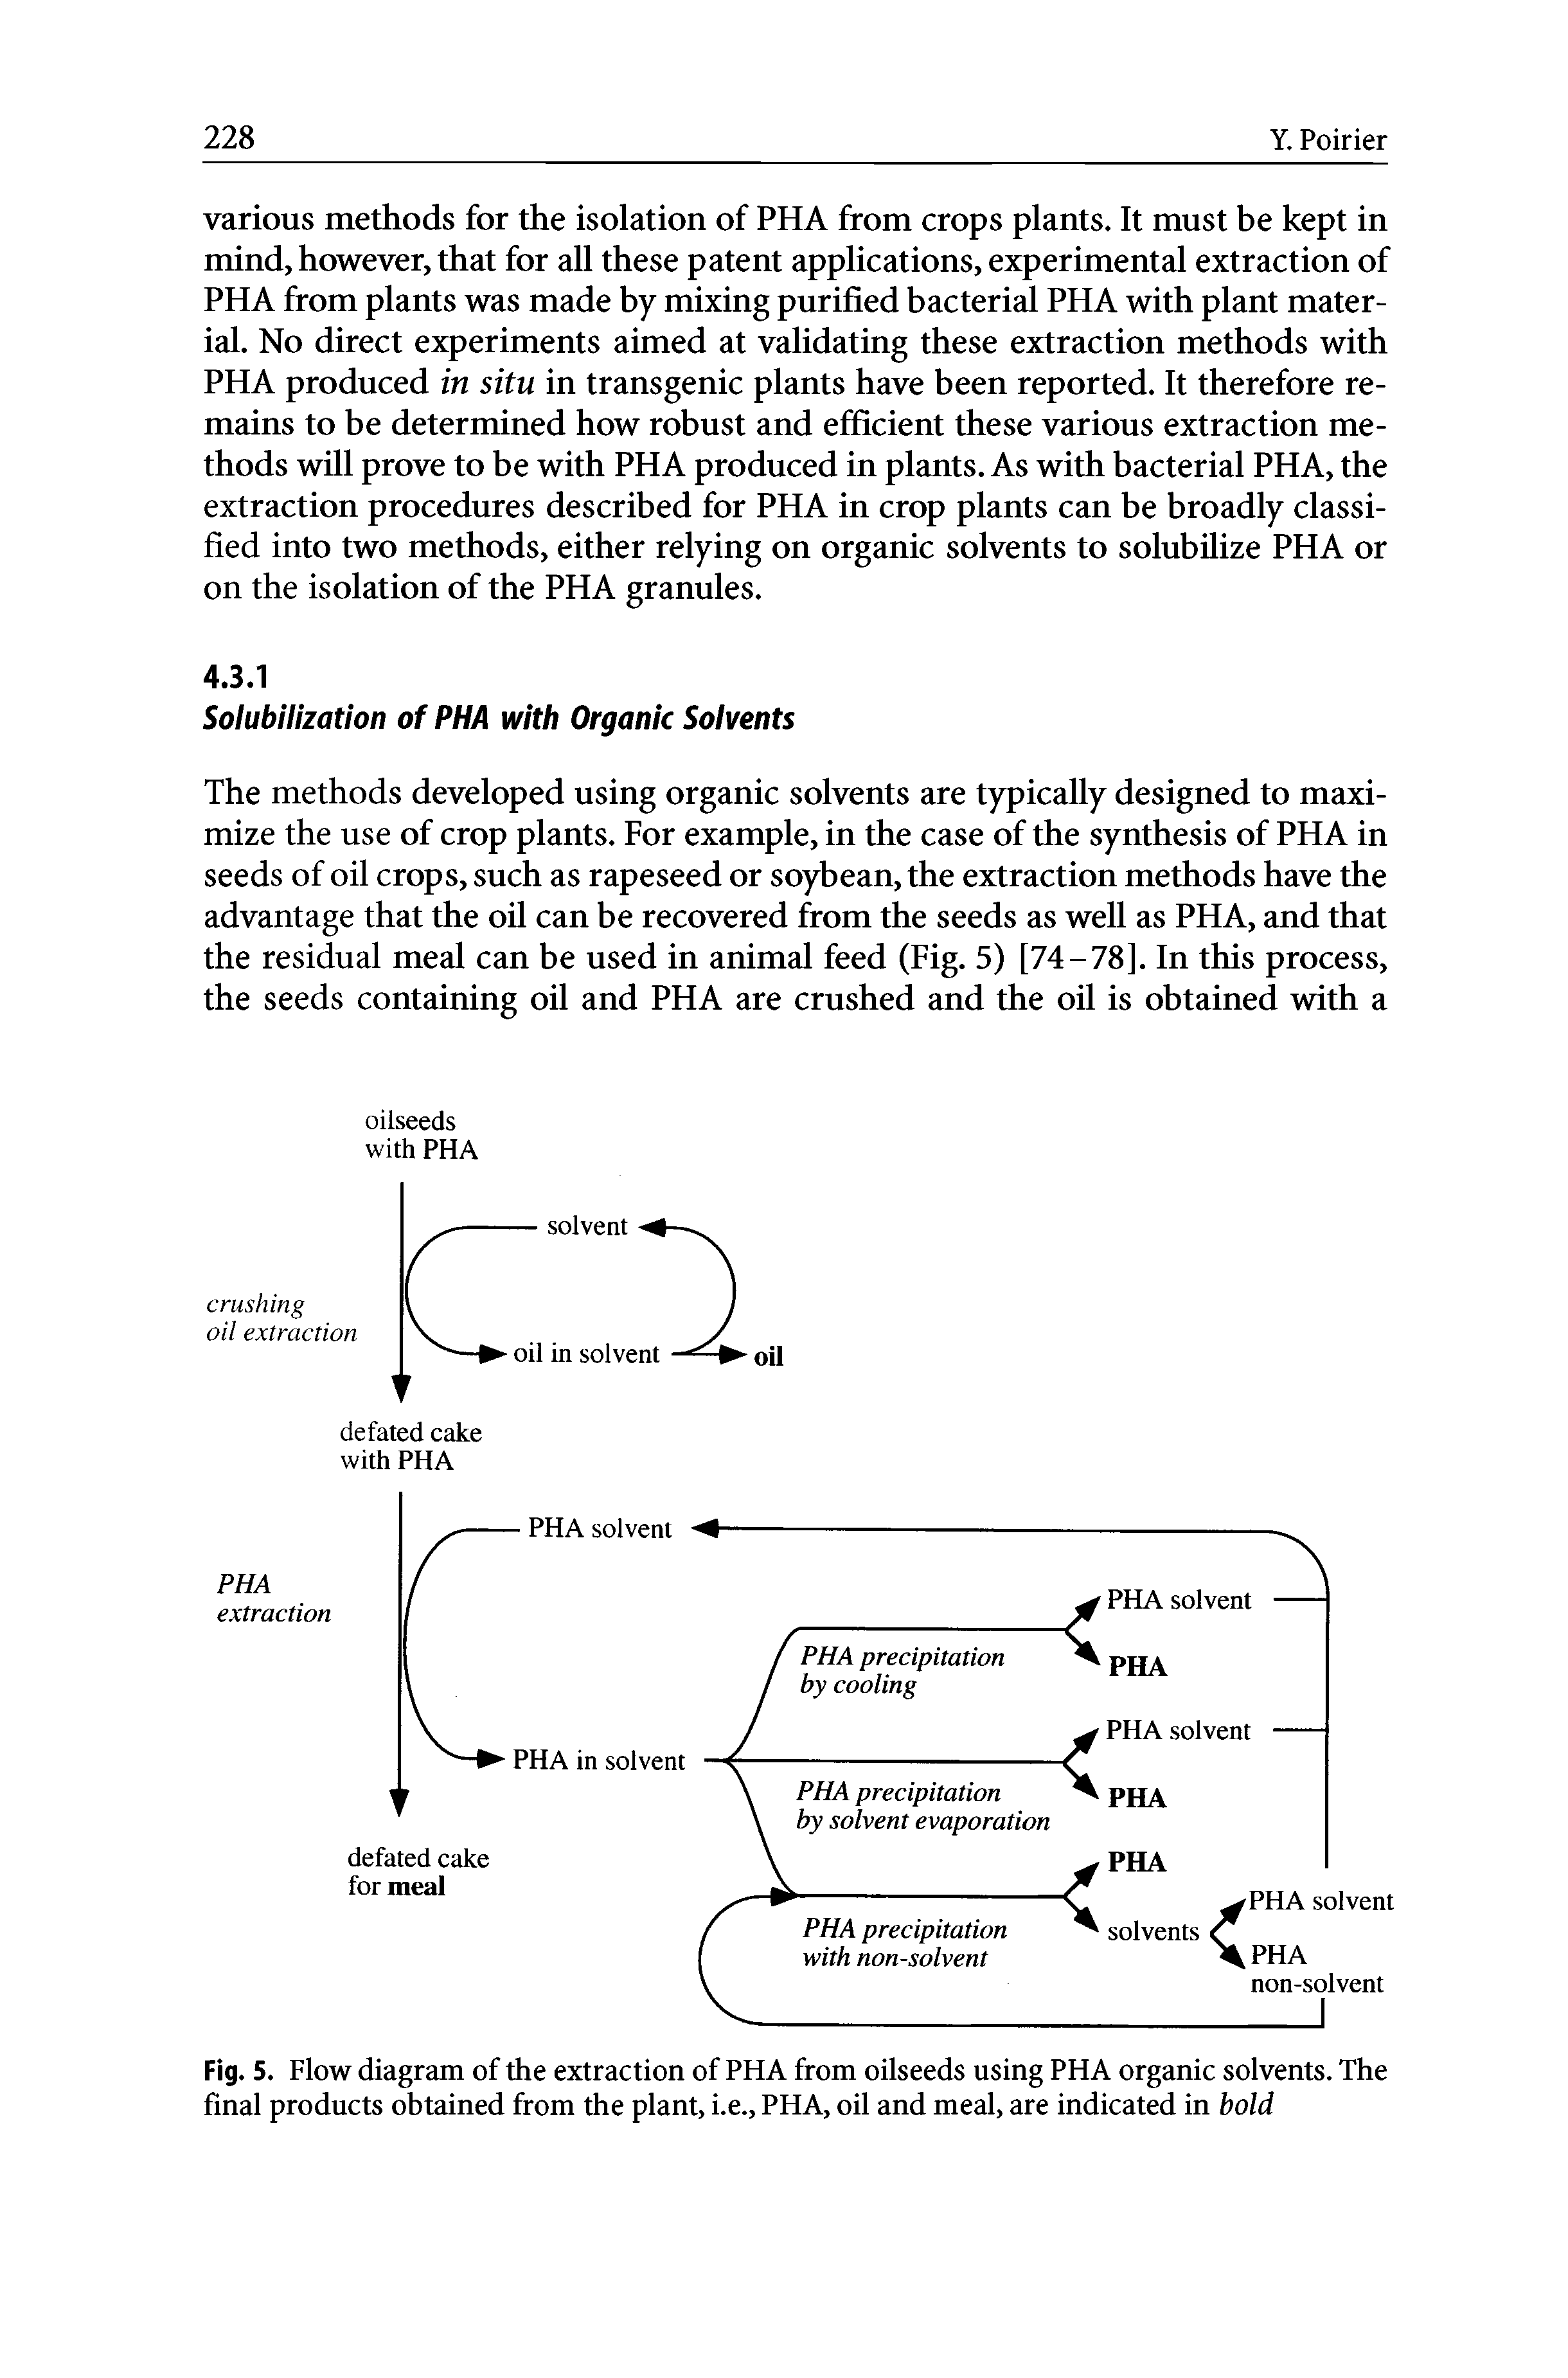 Fig. 5. Flow diagram of the extraction of PHA from oilseeds using PHA organic solvents. The final products obtained from the plant, i.e., PHA, oil and meal, are indicated in bold...